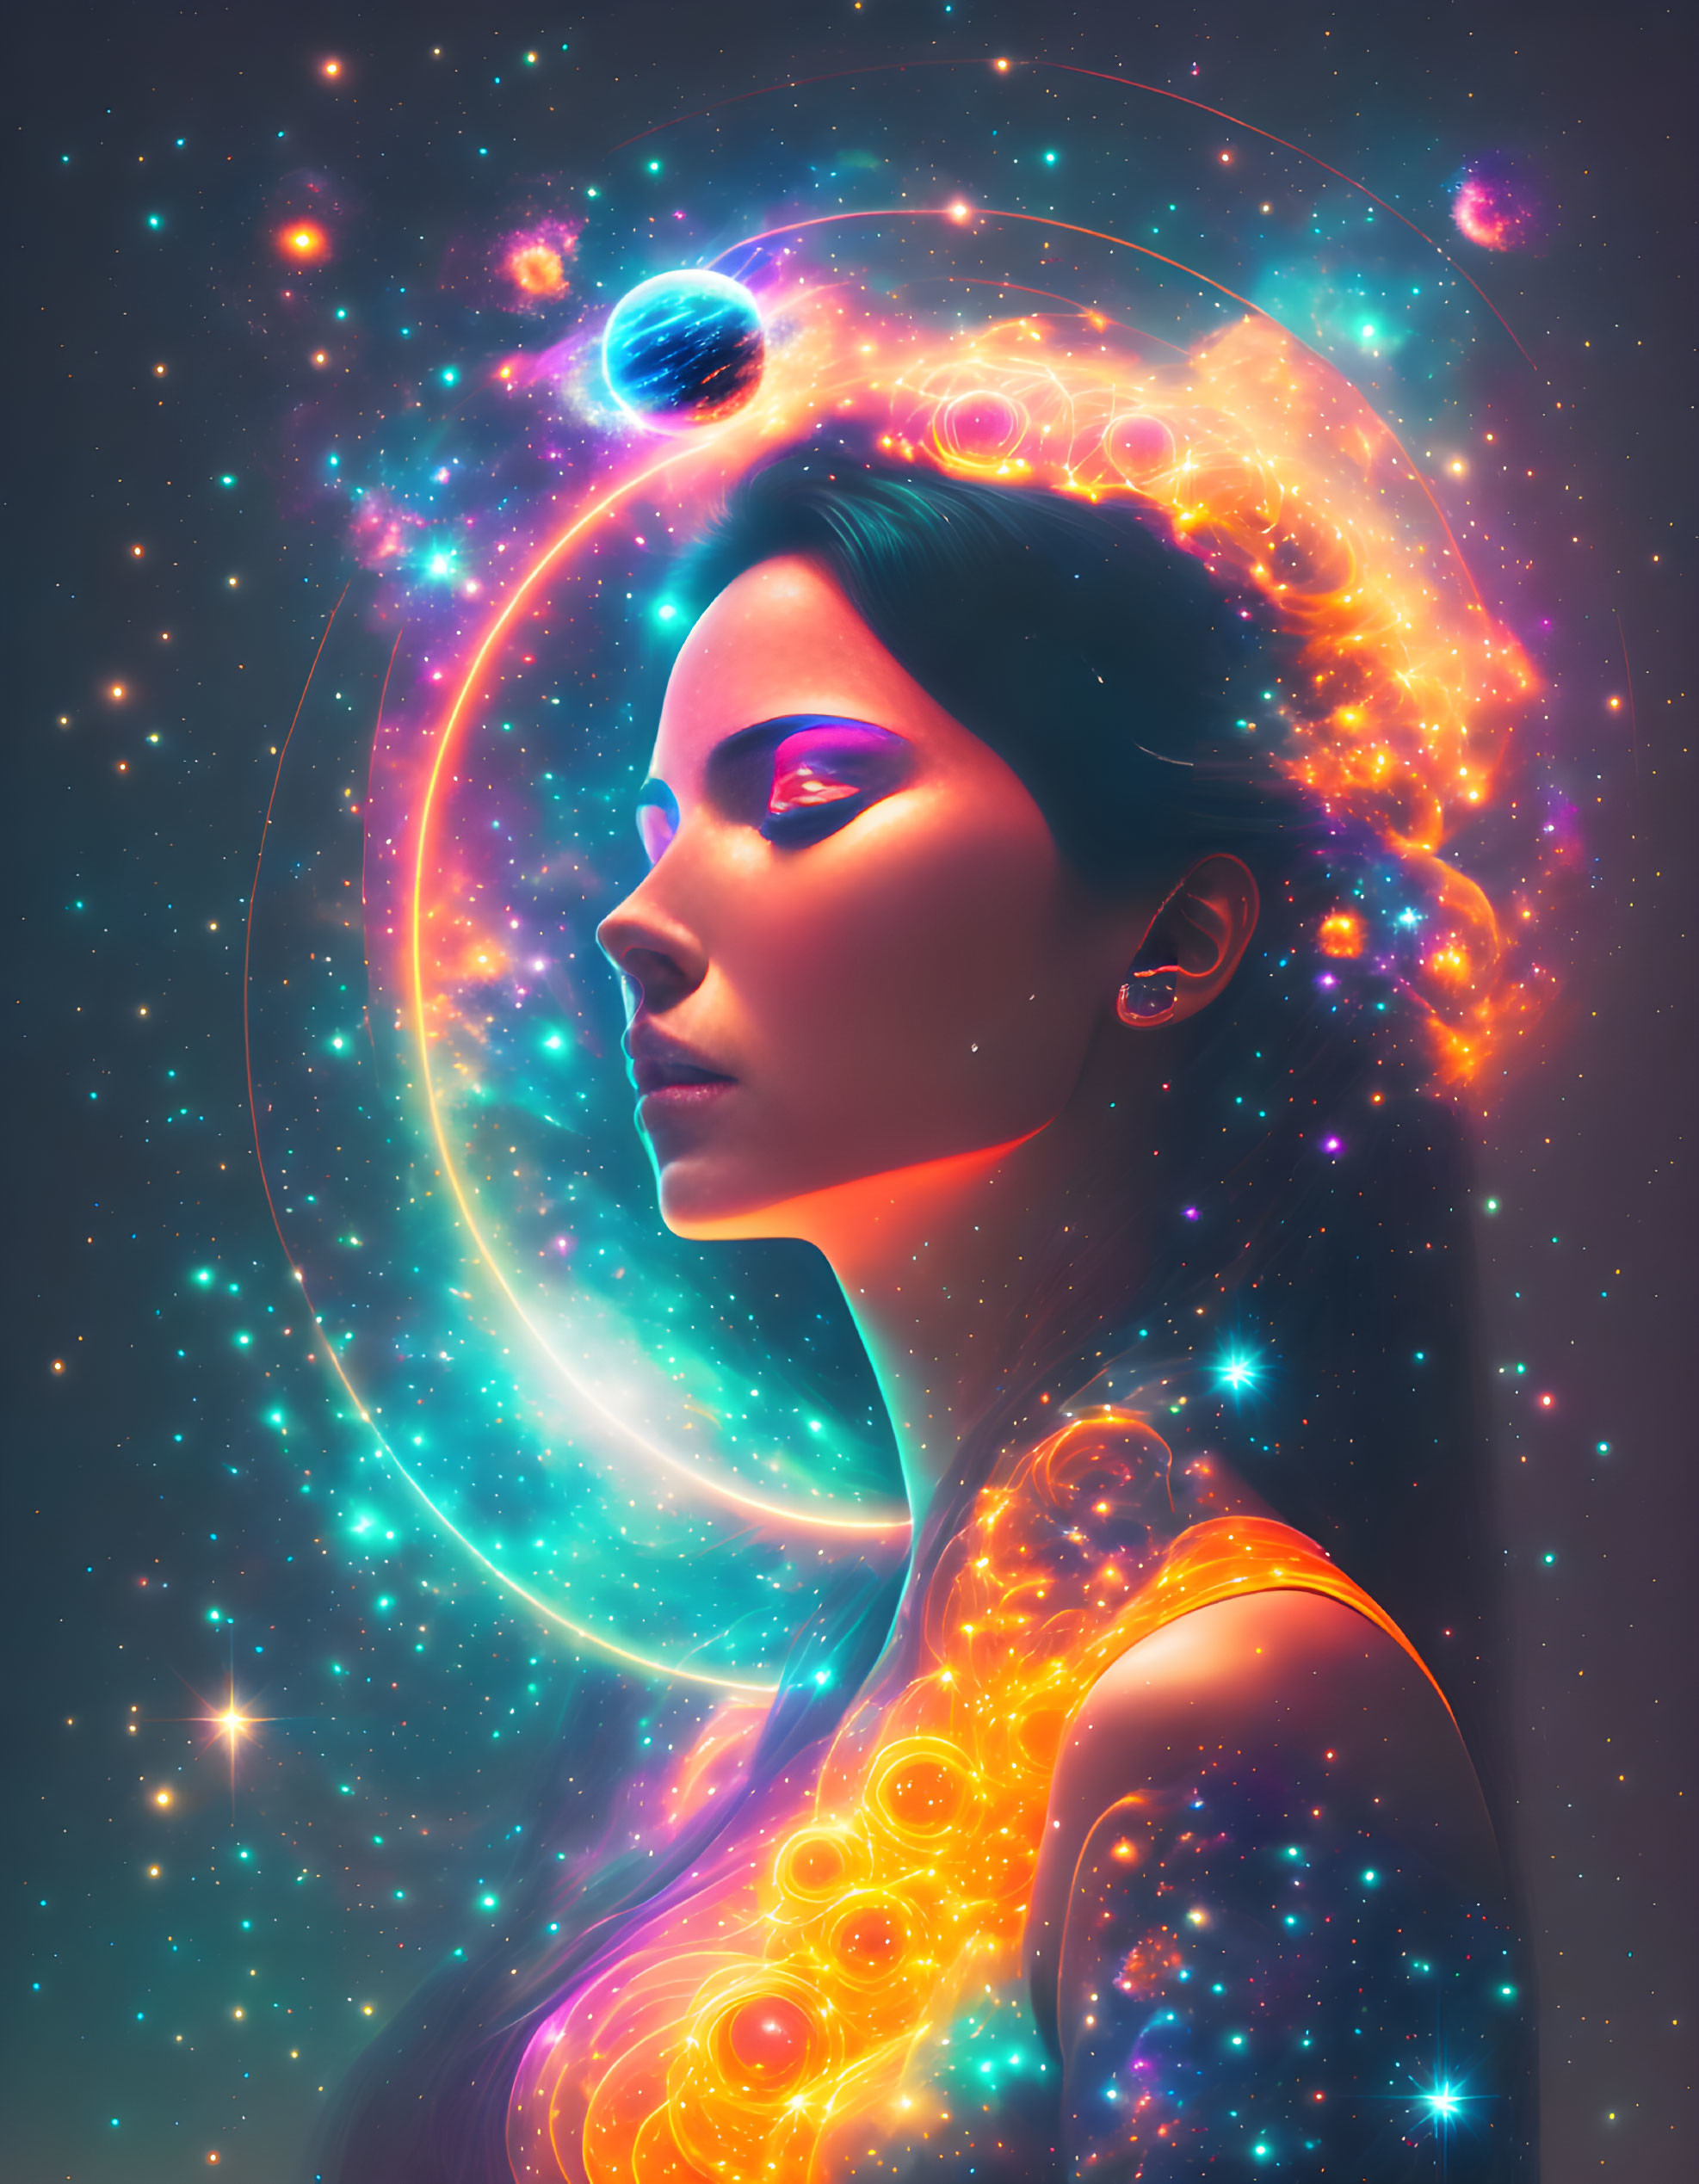 Cosmic-themed digital artwork of a woman's profile with glowing rings